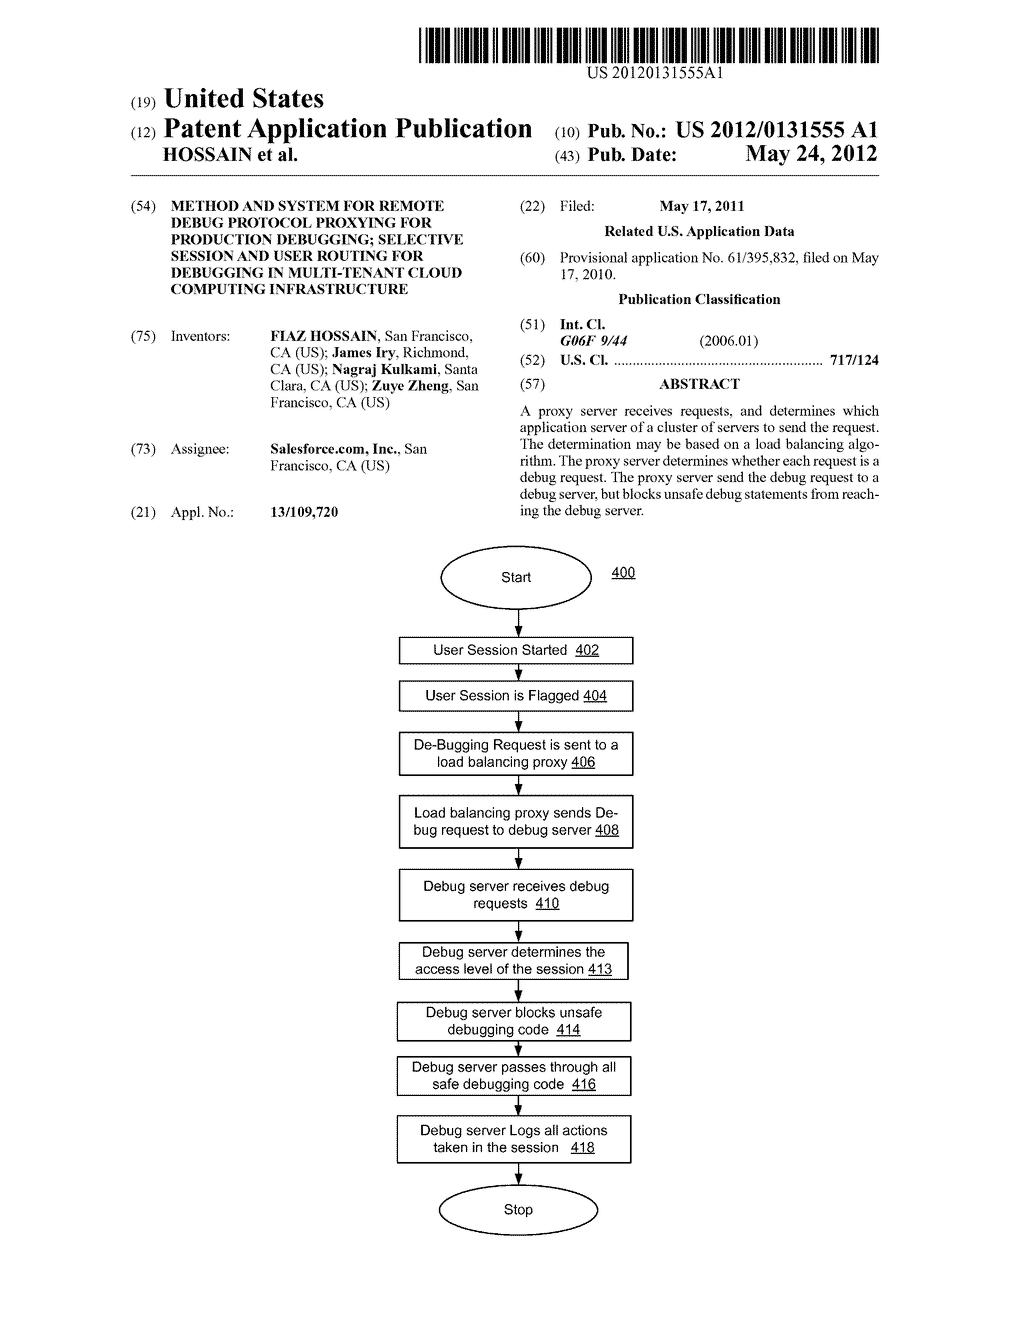 METHOD AND SYSTEM FOR REMOTE DEBUG PROTOCOL PROXYING FOR PRODUCTION     DEBUGGING; SELECTIVE SESSION AND USER ROUTING FOR DEBUGGING IN     MULTI-TENANT CLOUD COMPUTING INFRASTRUCTURE - diagram, schematic, and image 01